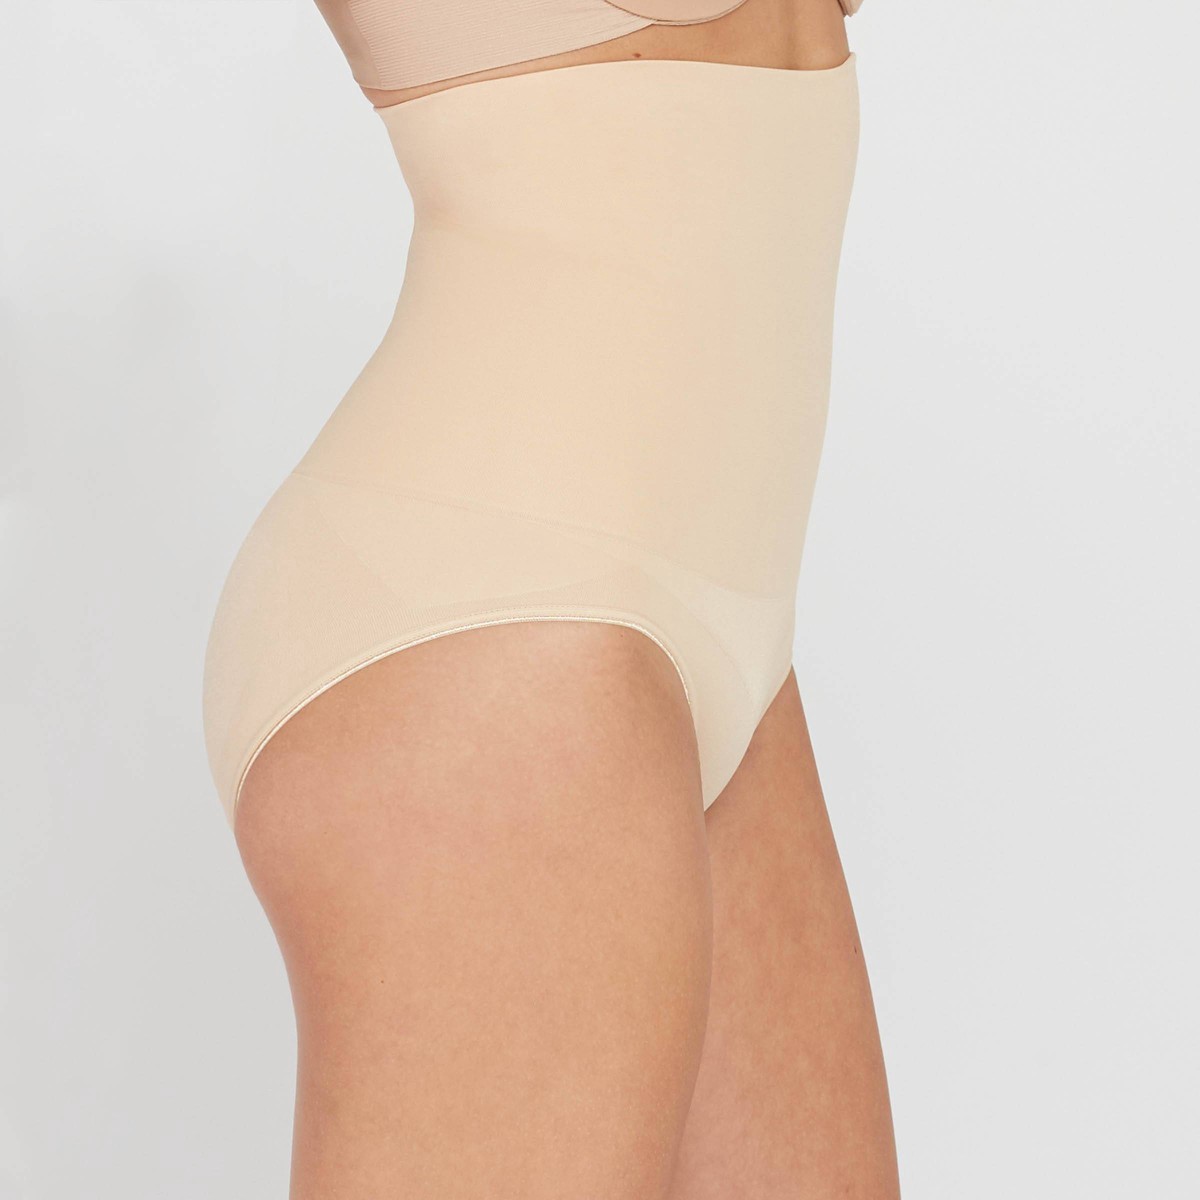 slide 3 of 3, ASSETS by Spanx Women's Remarkable Results High Waist Control Brief - Light Beige S, 1 ct